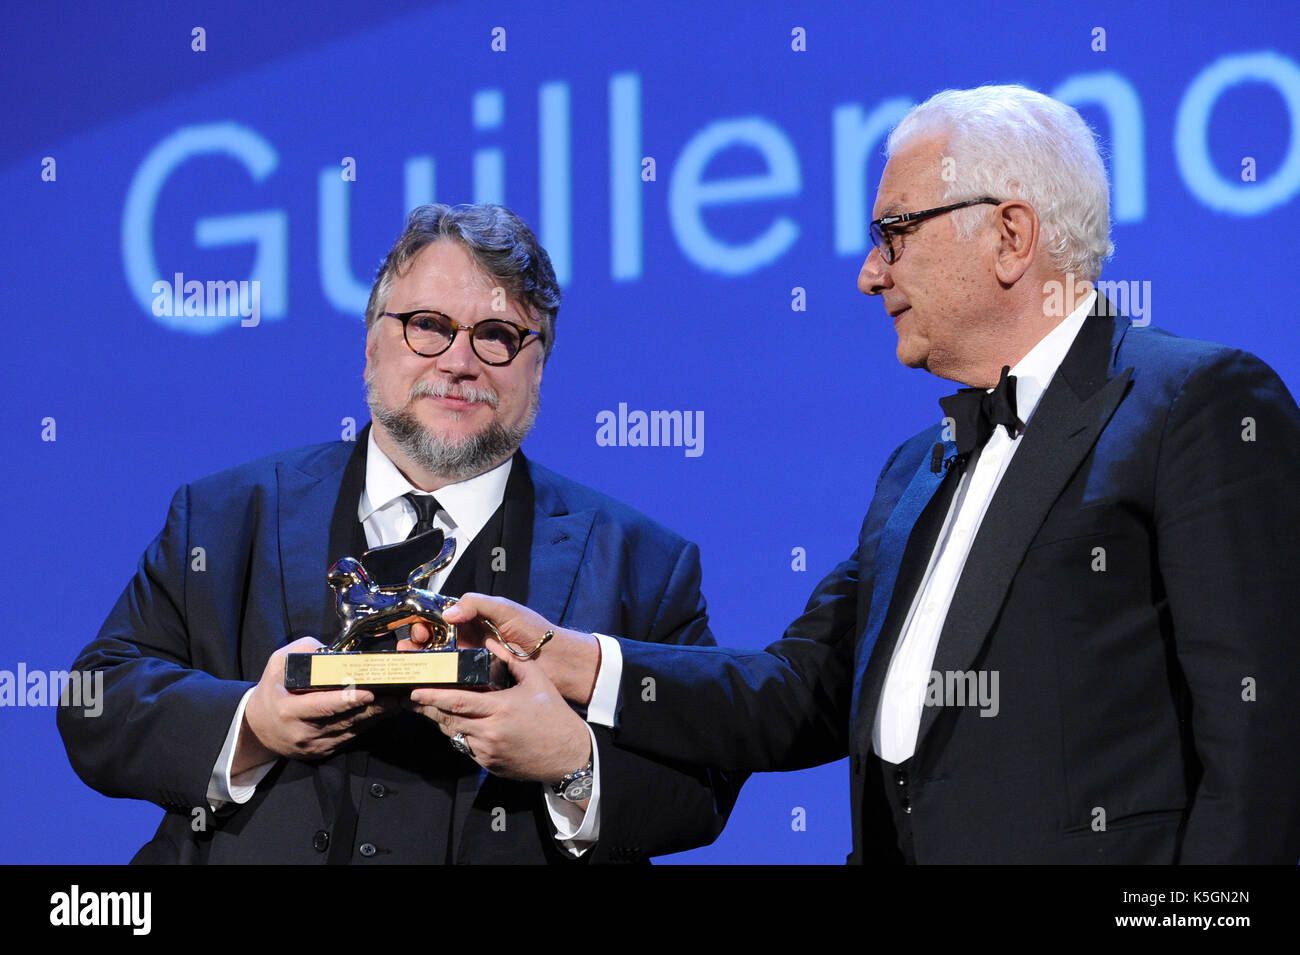 Venice, Italy. 9th September, 2017. 74th Venice Film Festival, 'Venezia 74' Golden Lions Awards Ceremony Pictured: Guillermo Del Toro, Paolo Baratta Credit: Independent Photo Agency Srl/Alamy Live News Stock Photo